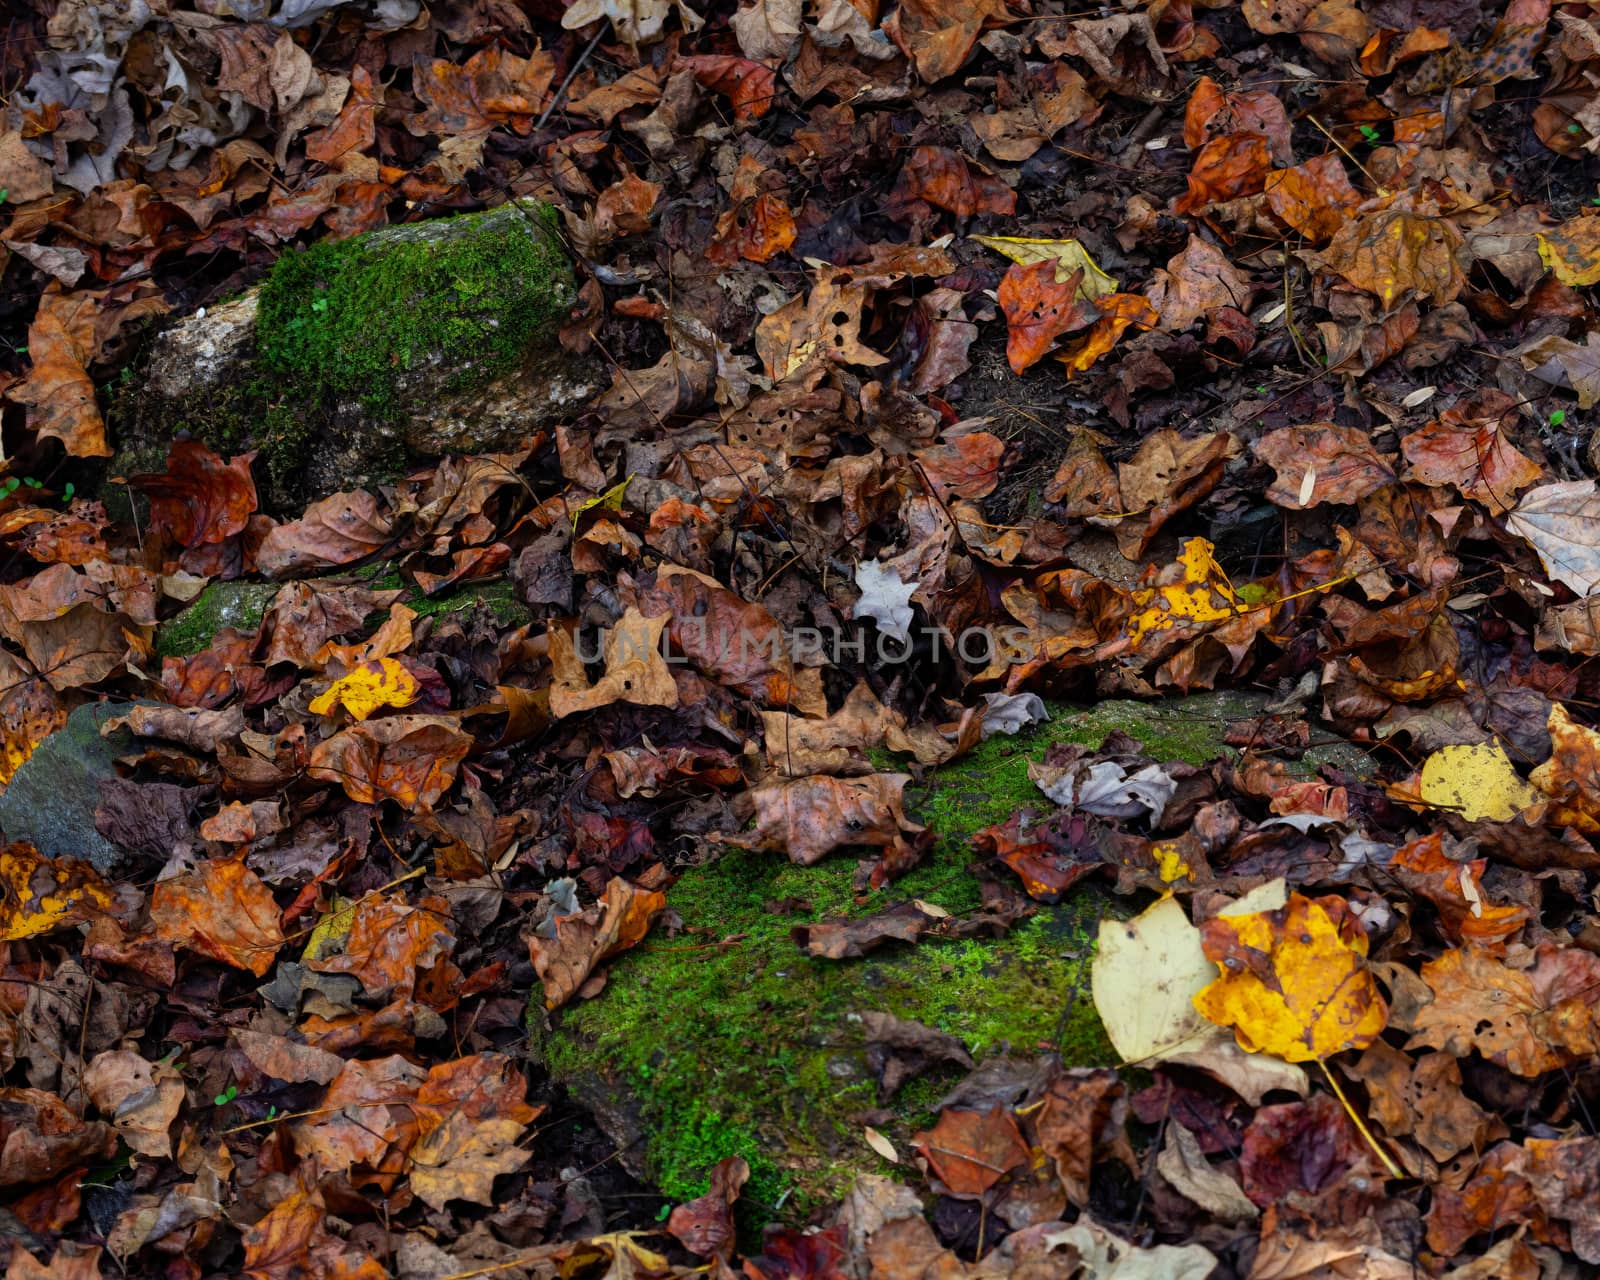 Wet Autumn Fallen Leaves by CharlieFloyd